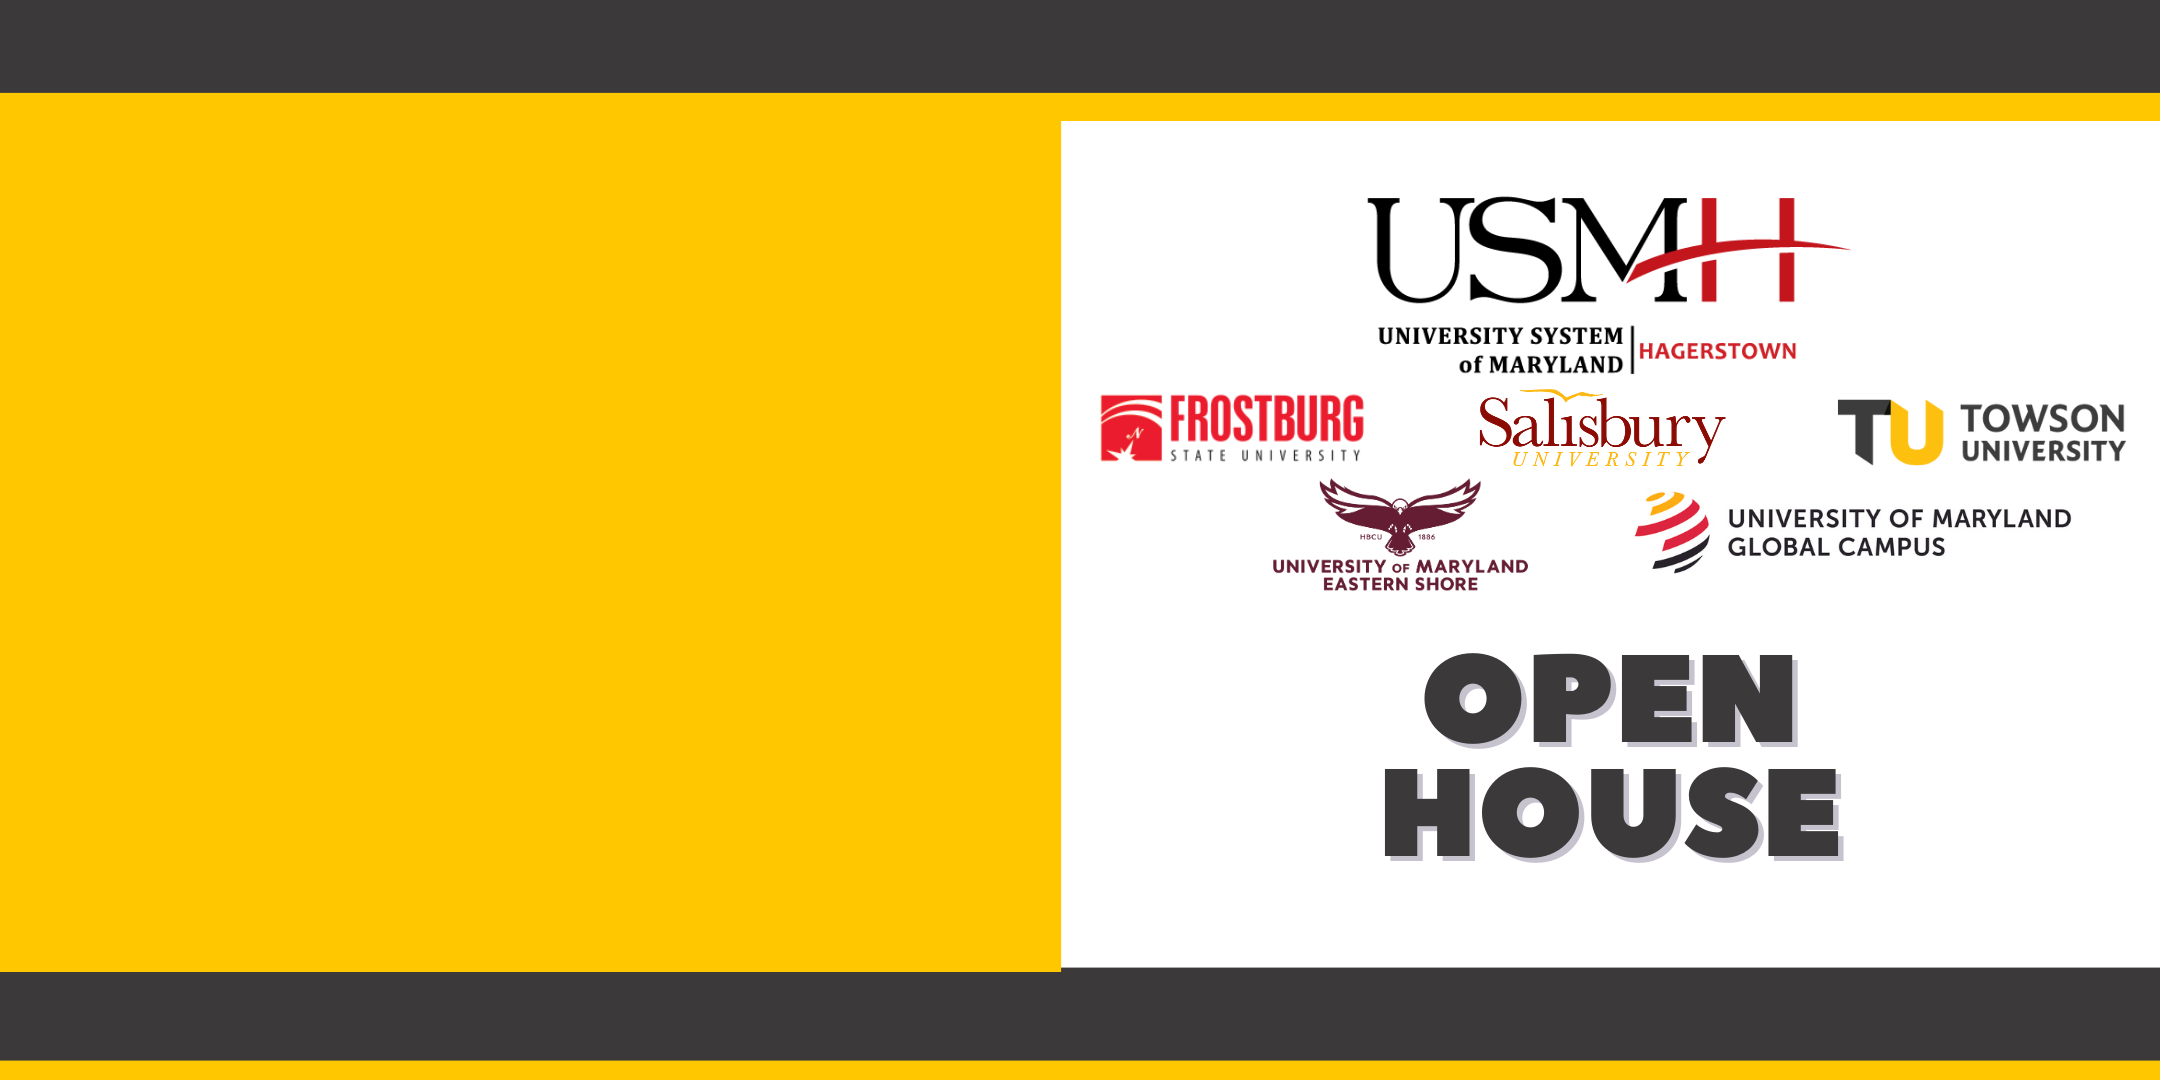 USMH Open House, Tuesday, October 3rd from 5 pm to 7 pm 32 West Washington Street